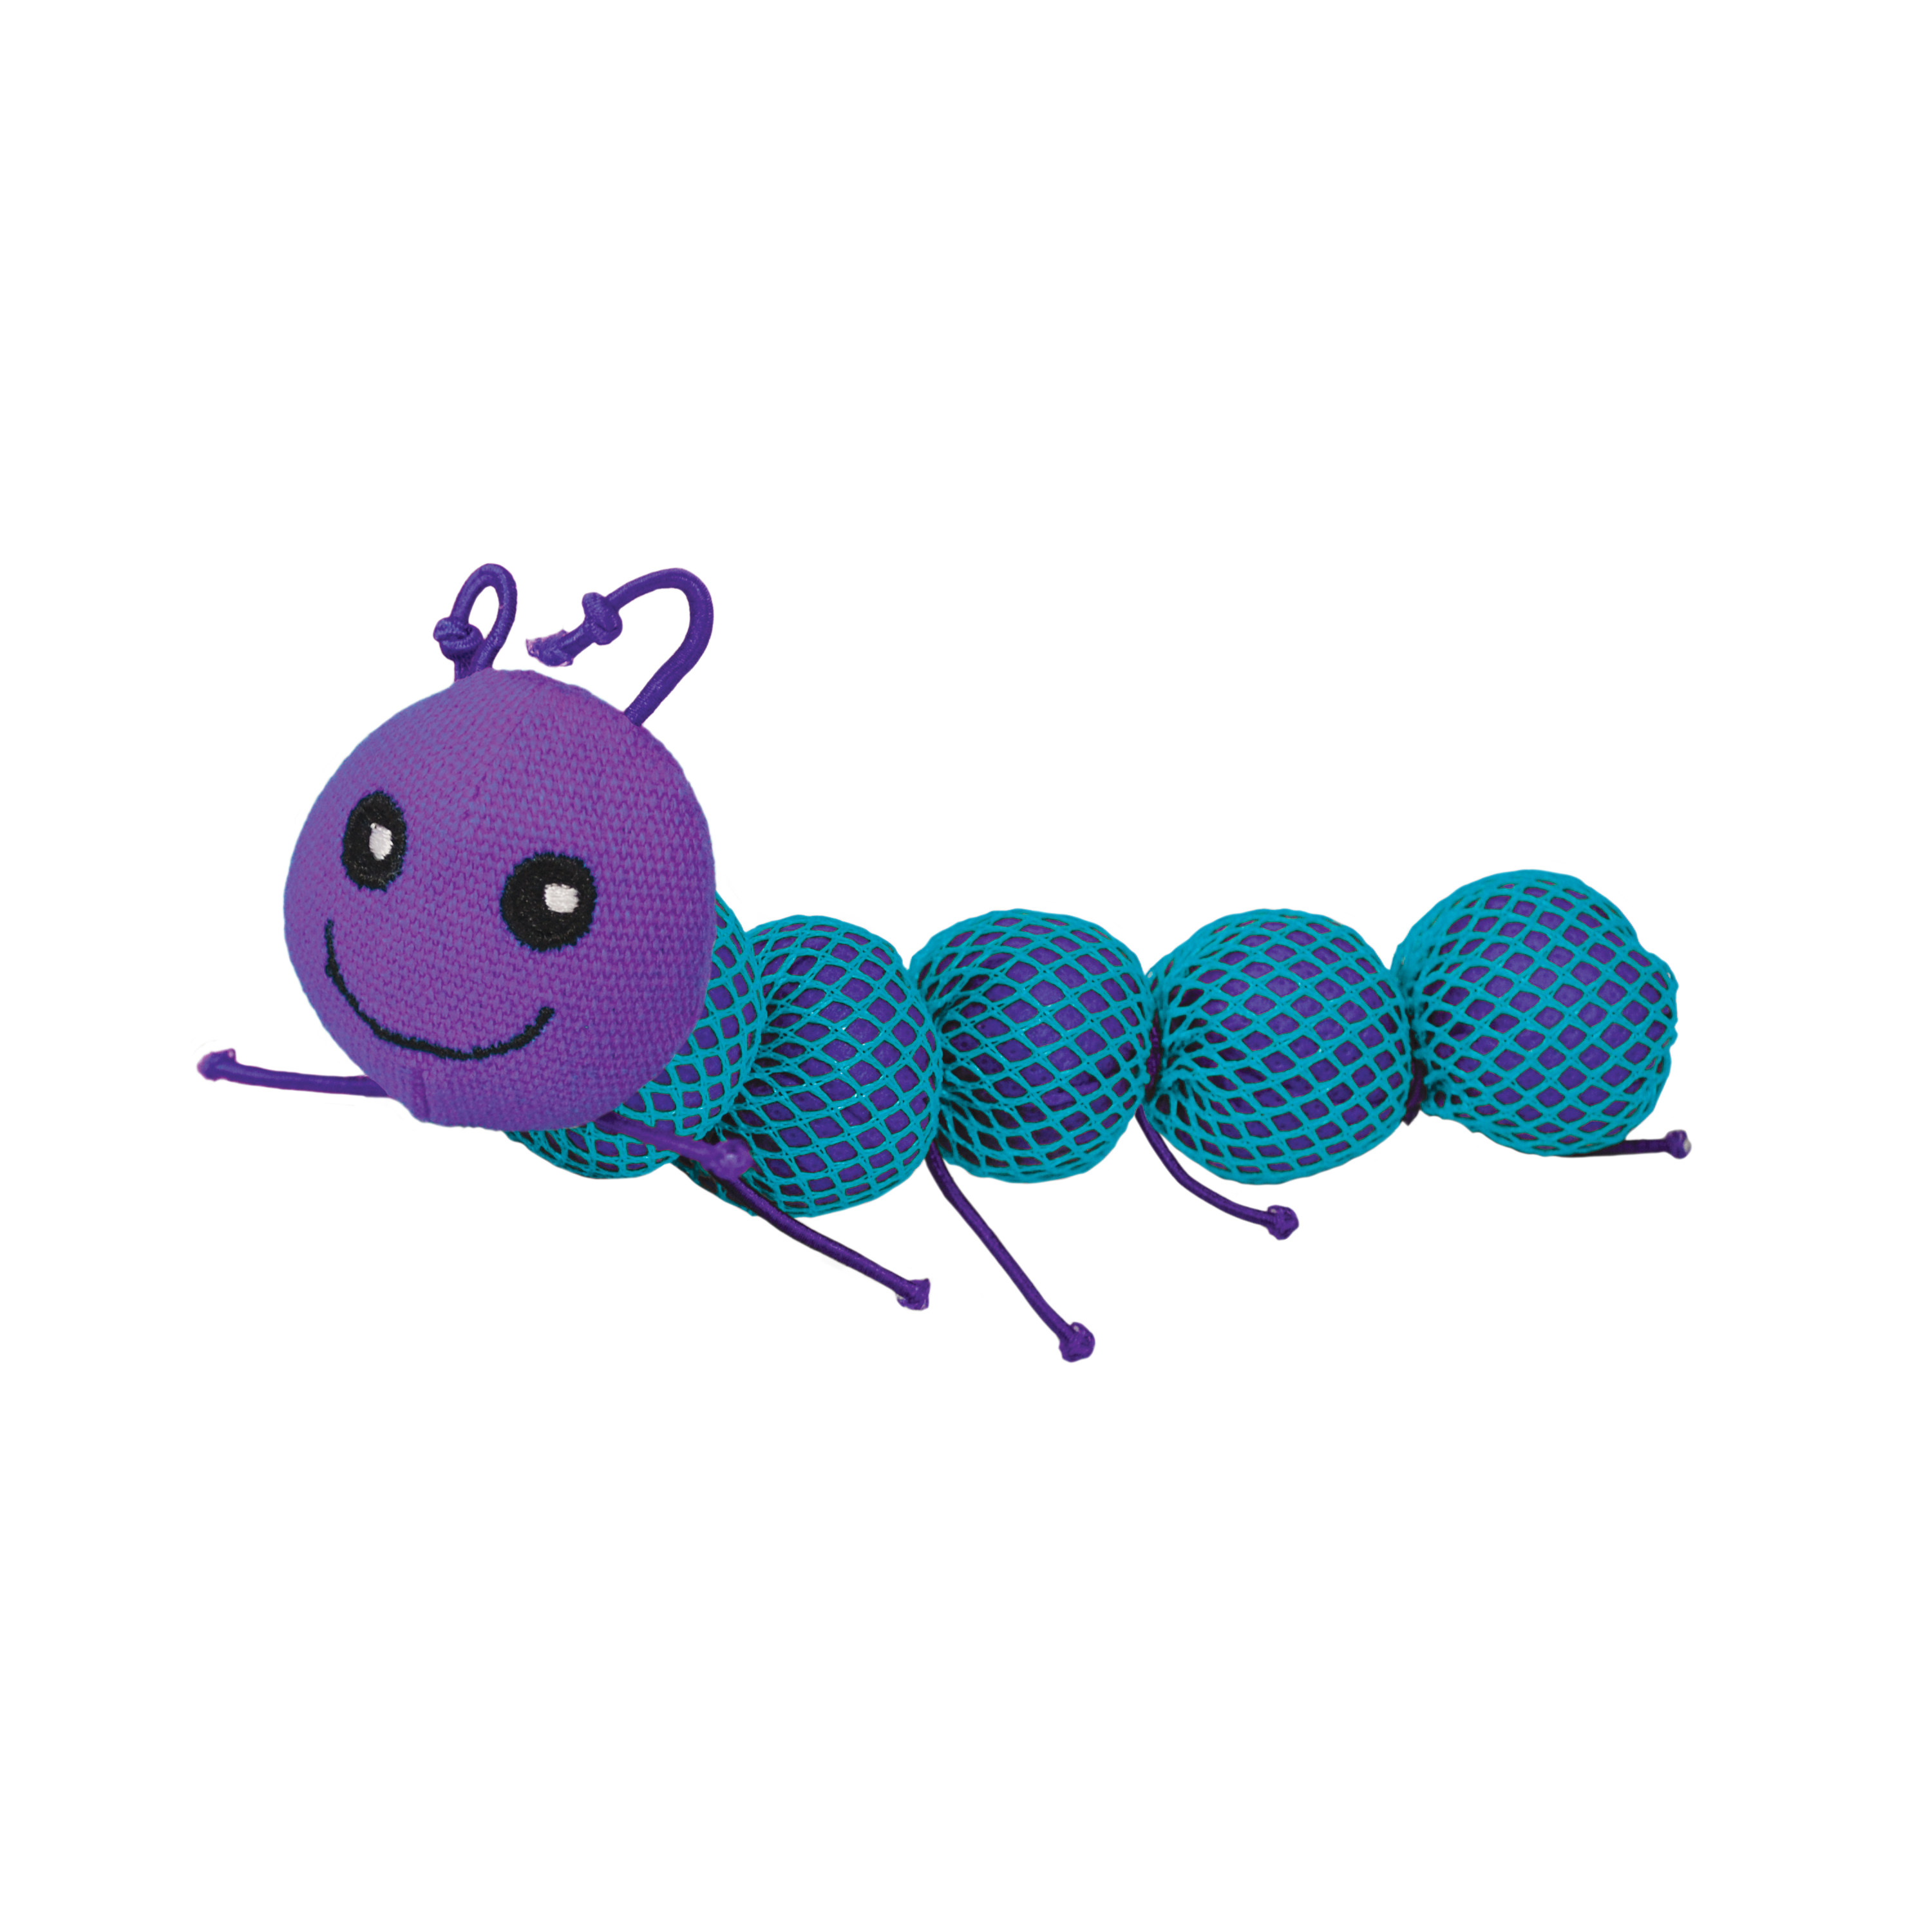 Nibble Critter Catnipillar offpack product image